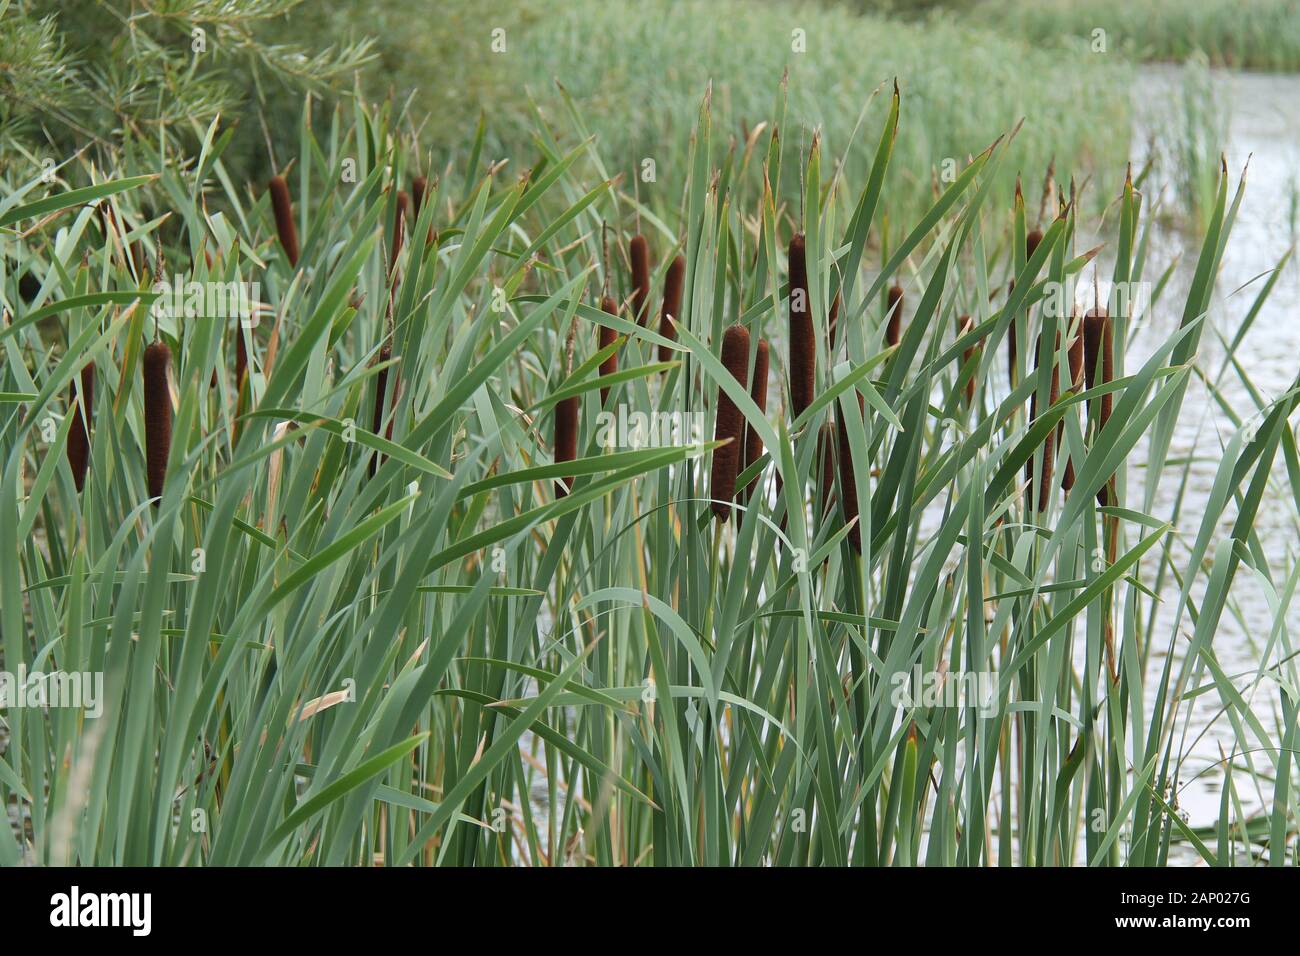 Bullrush Reed Plants Growing on the Edge of a Pond. Stock Photo